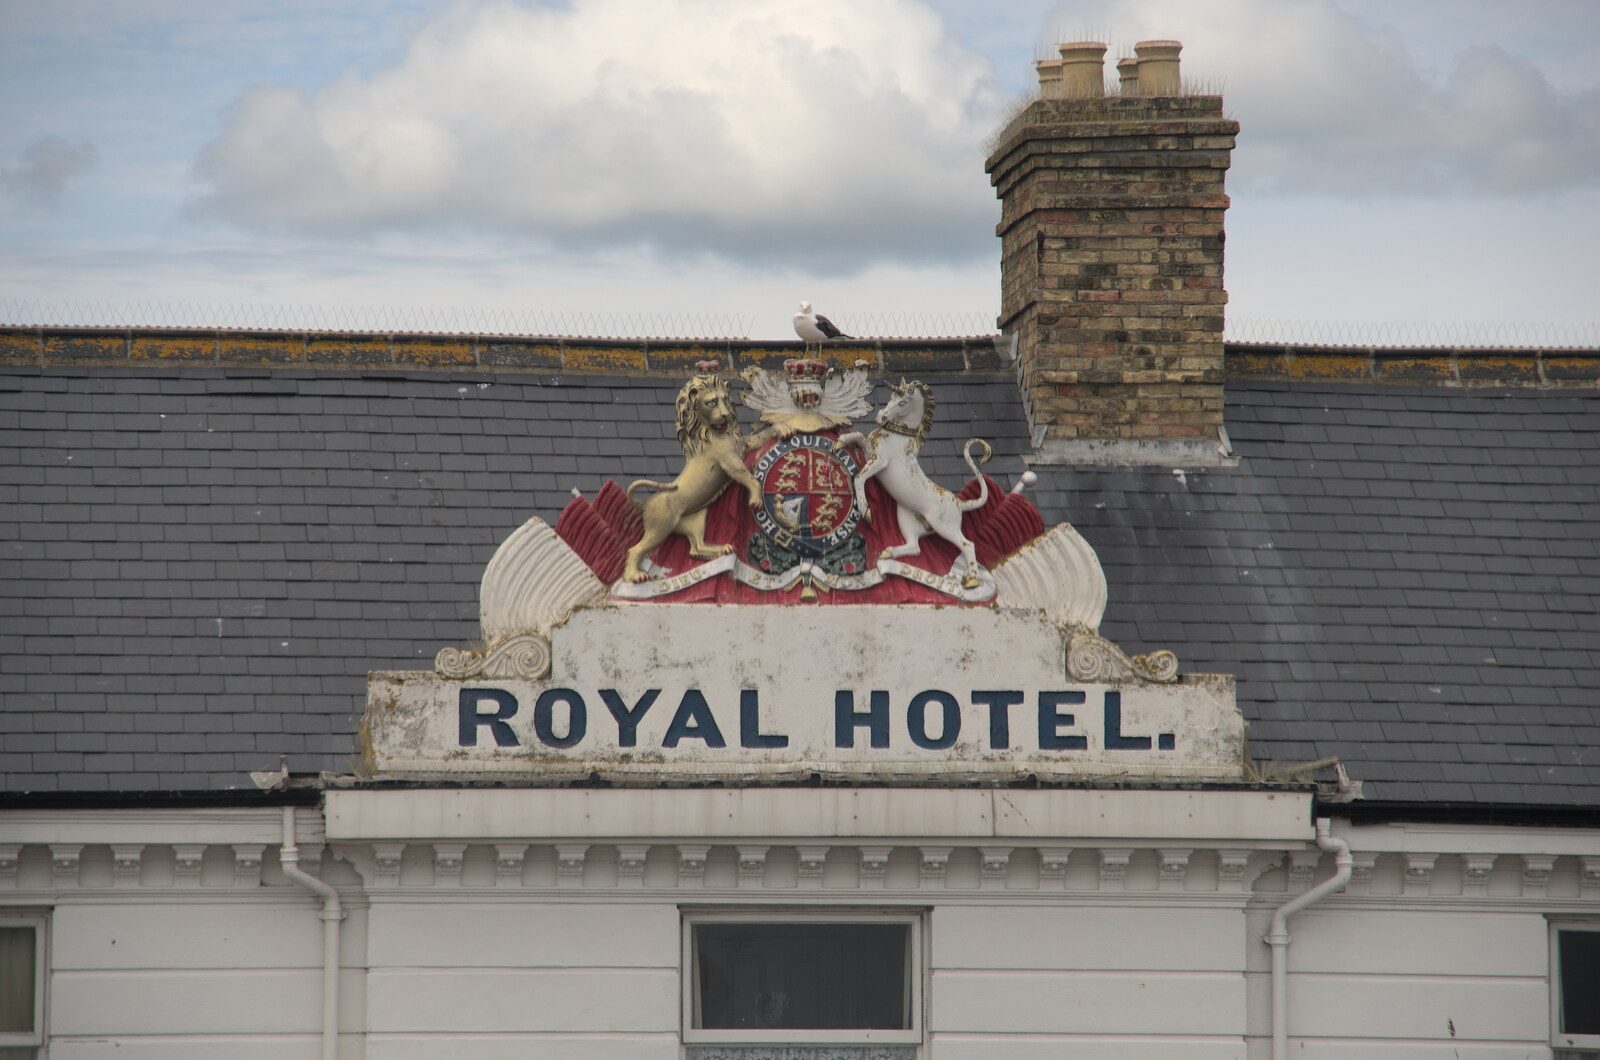 The Royal Hotel's crest from Faded Seaside Glamour: A Weekend in Great Yarmouth, Norfolk - 29th May 2022